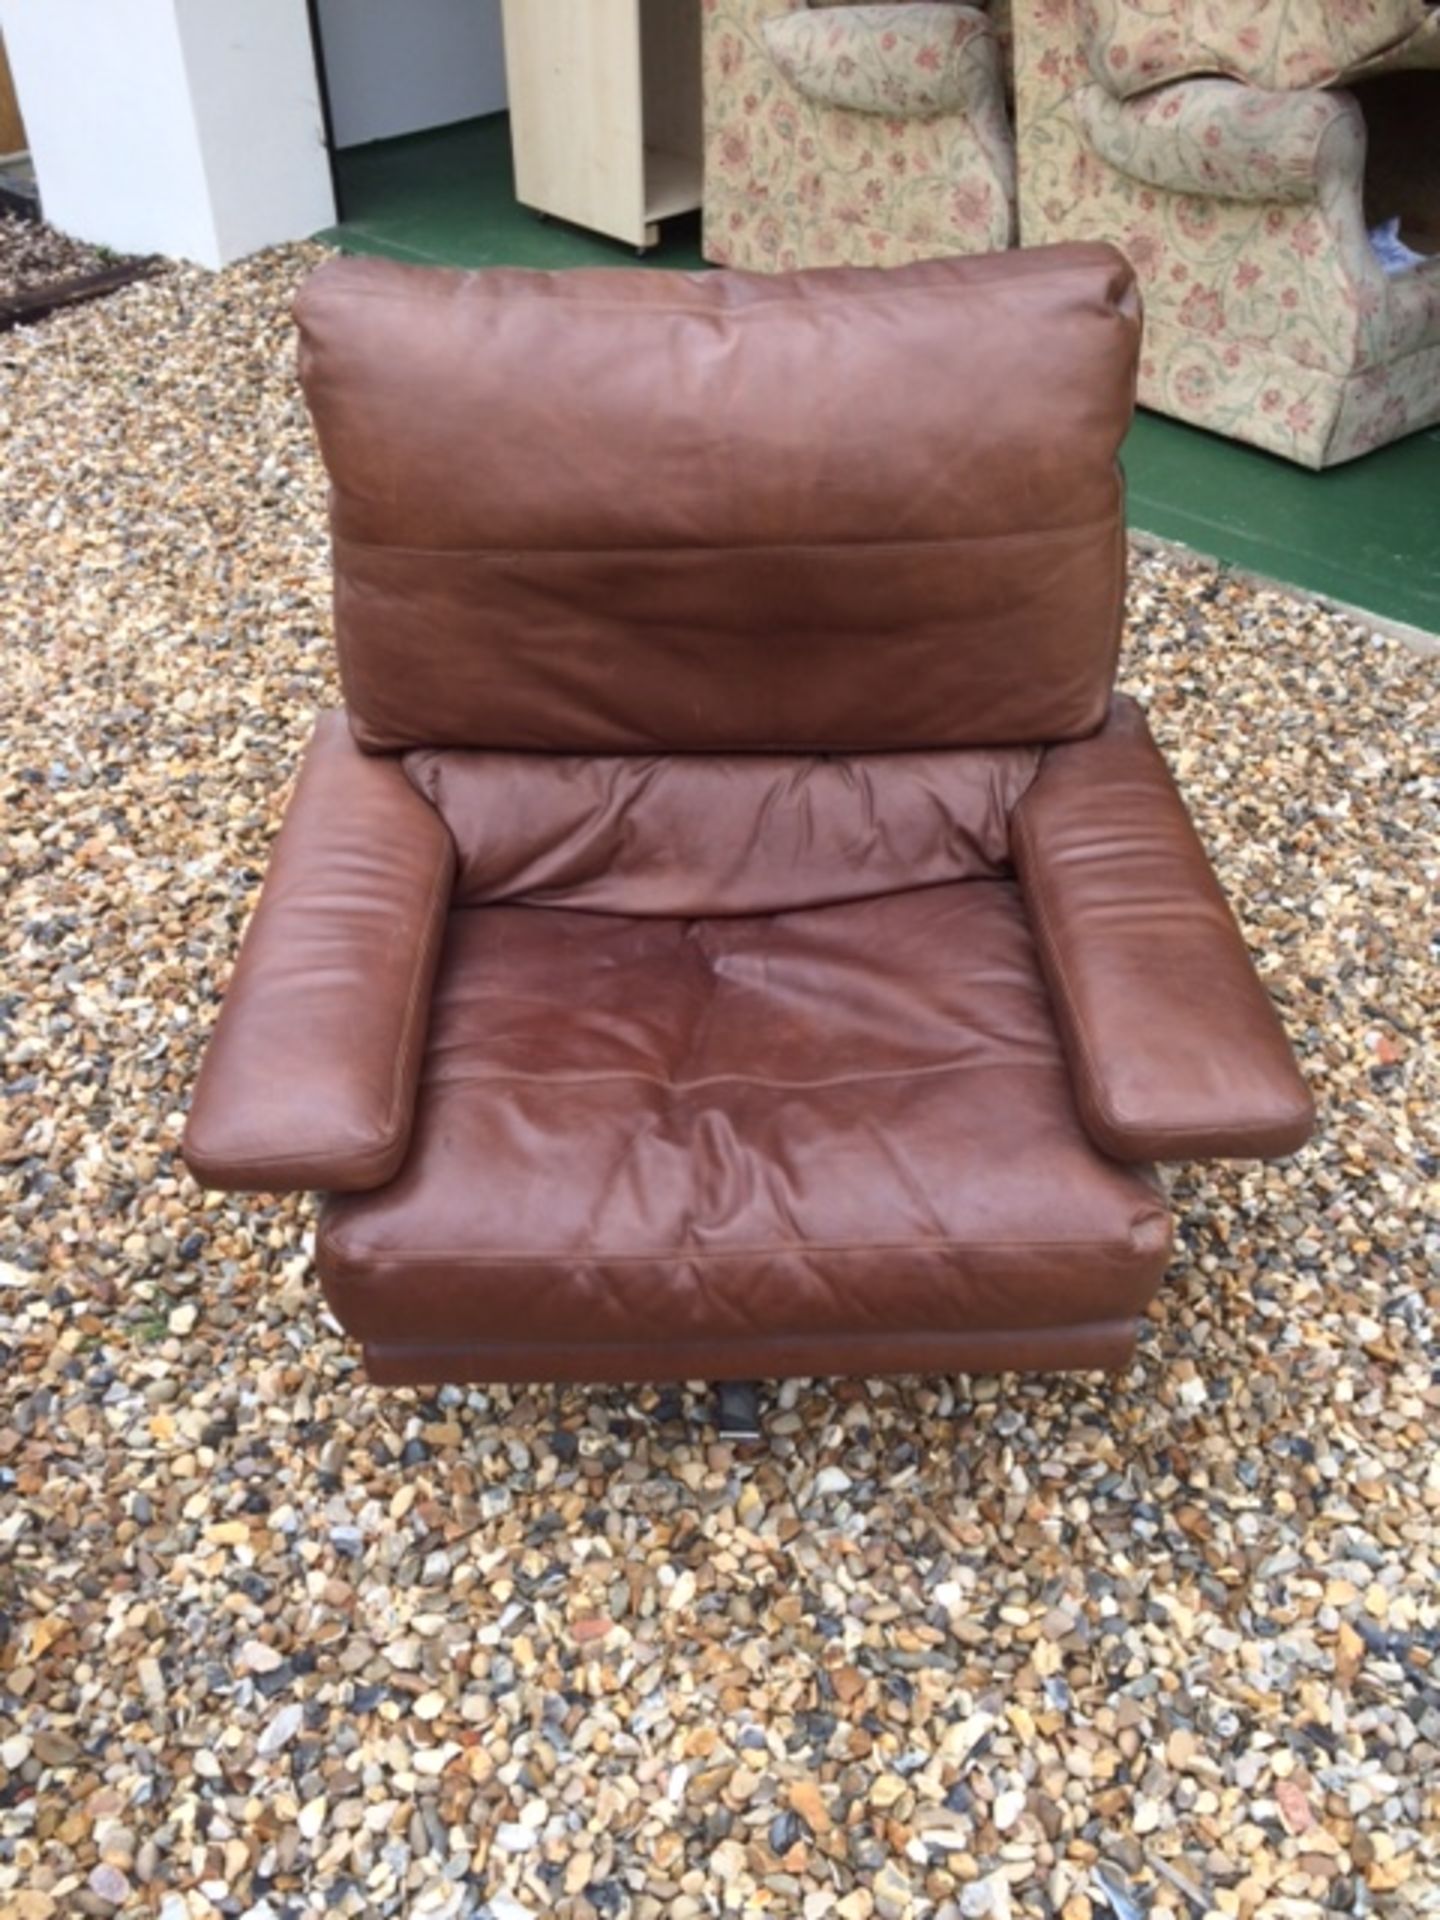 Rare Pieff vintage retro 70s brown leather 3 seater sofa, 2 seater sofa, chair and stool. - Image 3 of 8